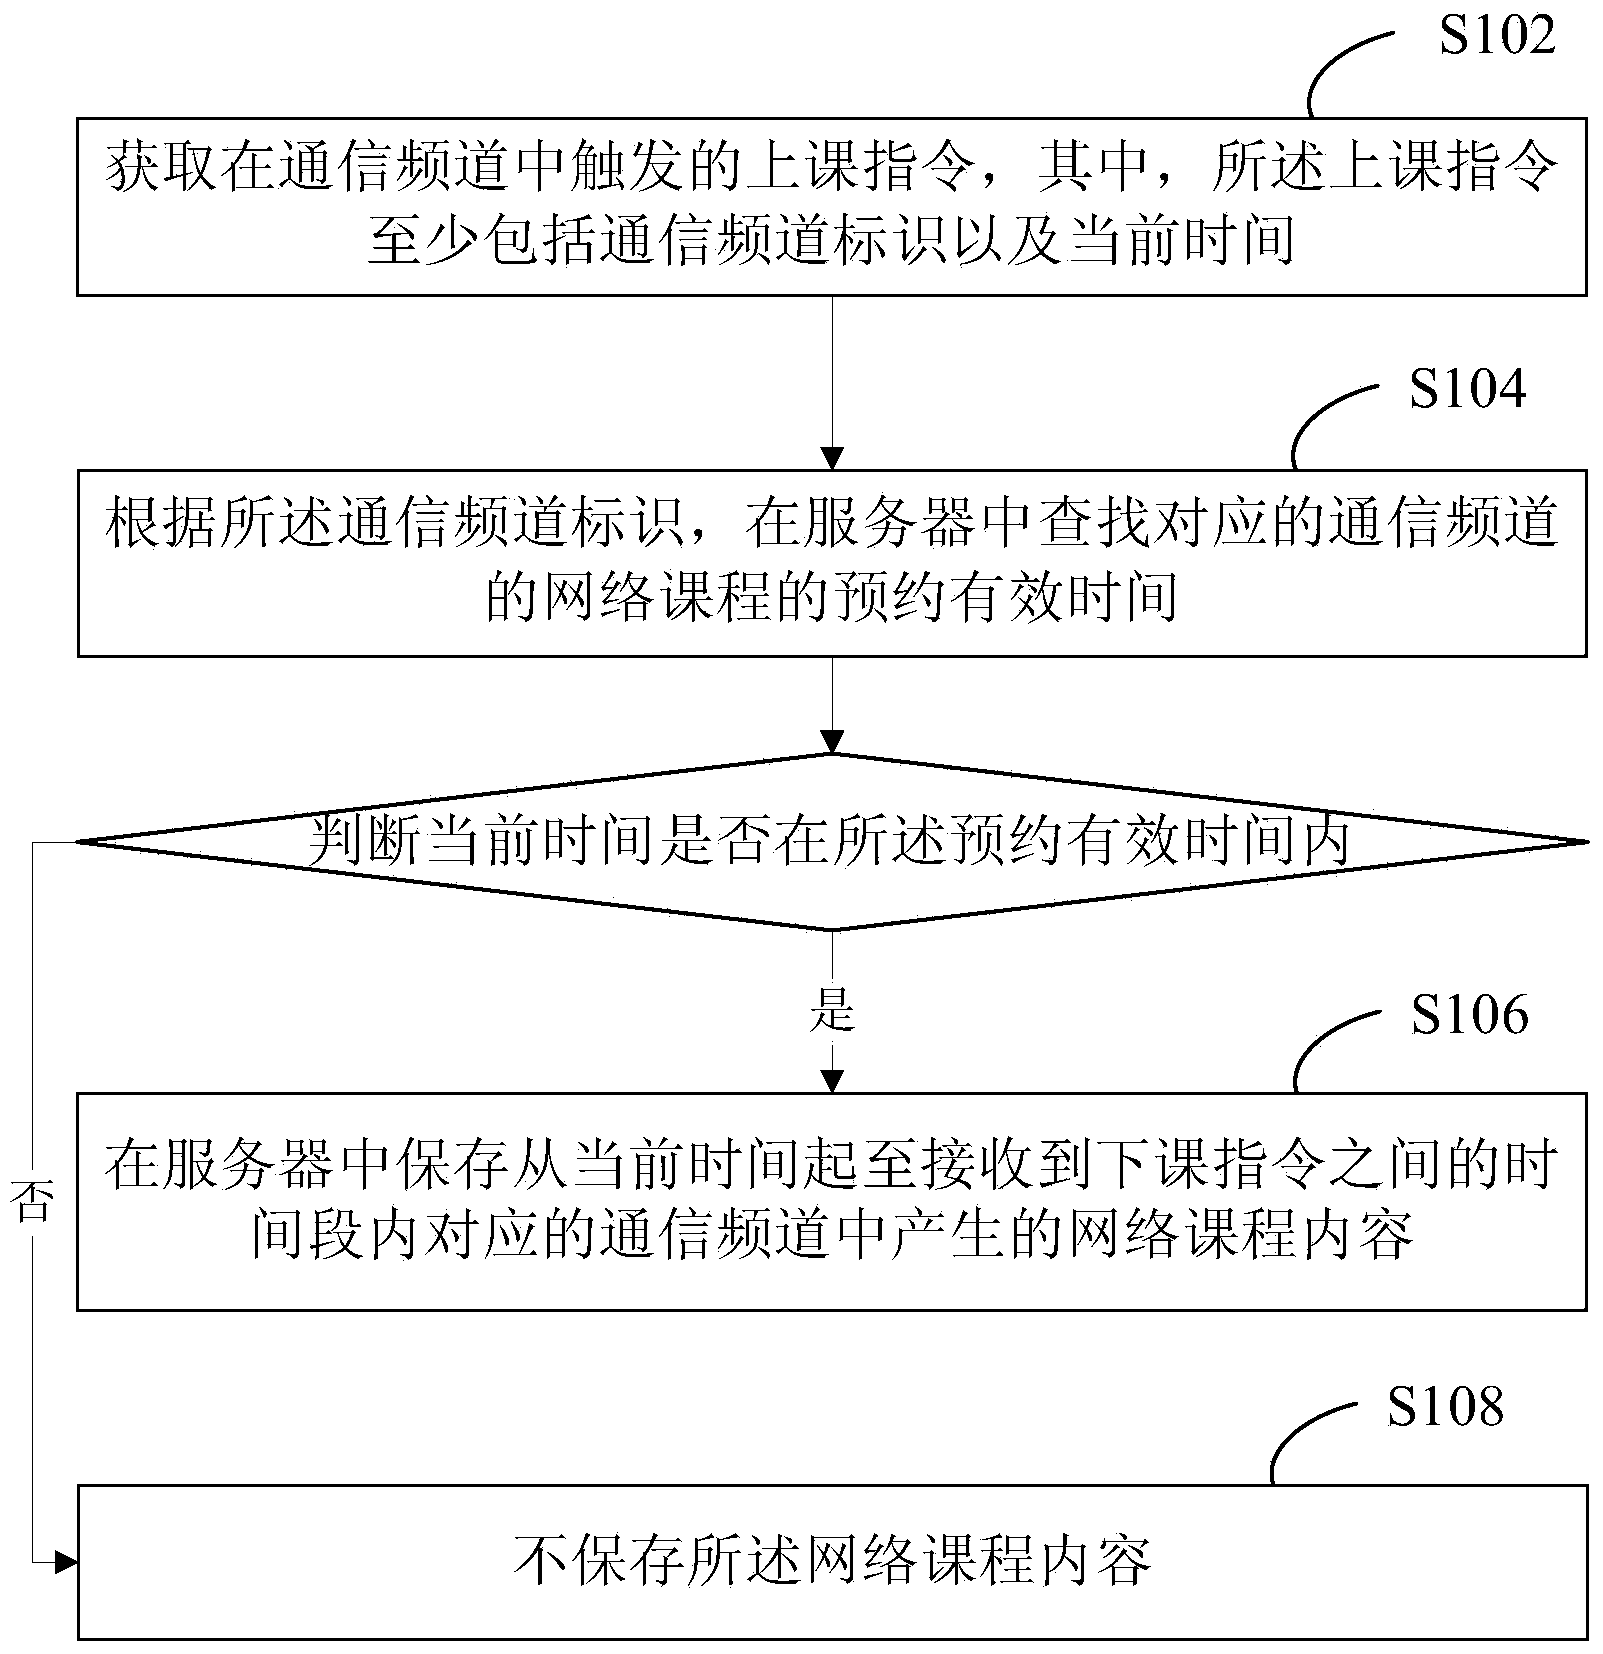 Method and system for automatically recording courses through communication software